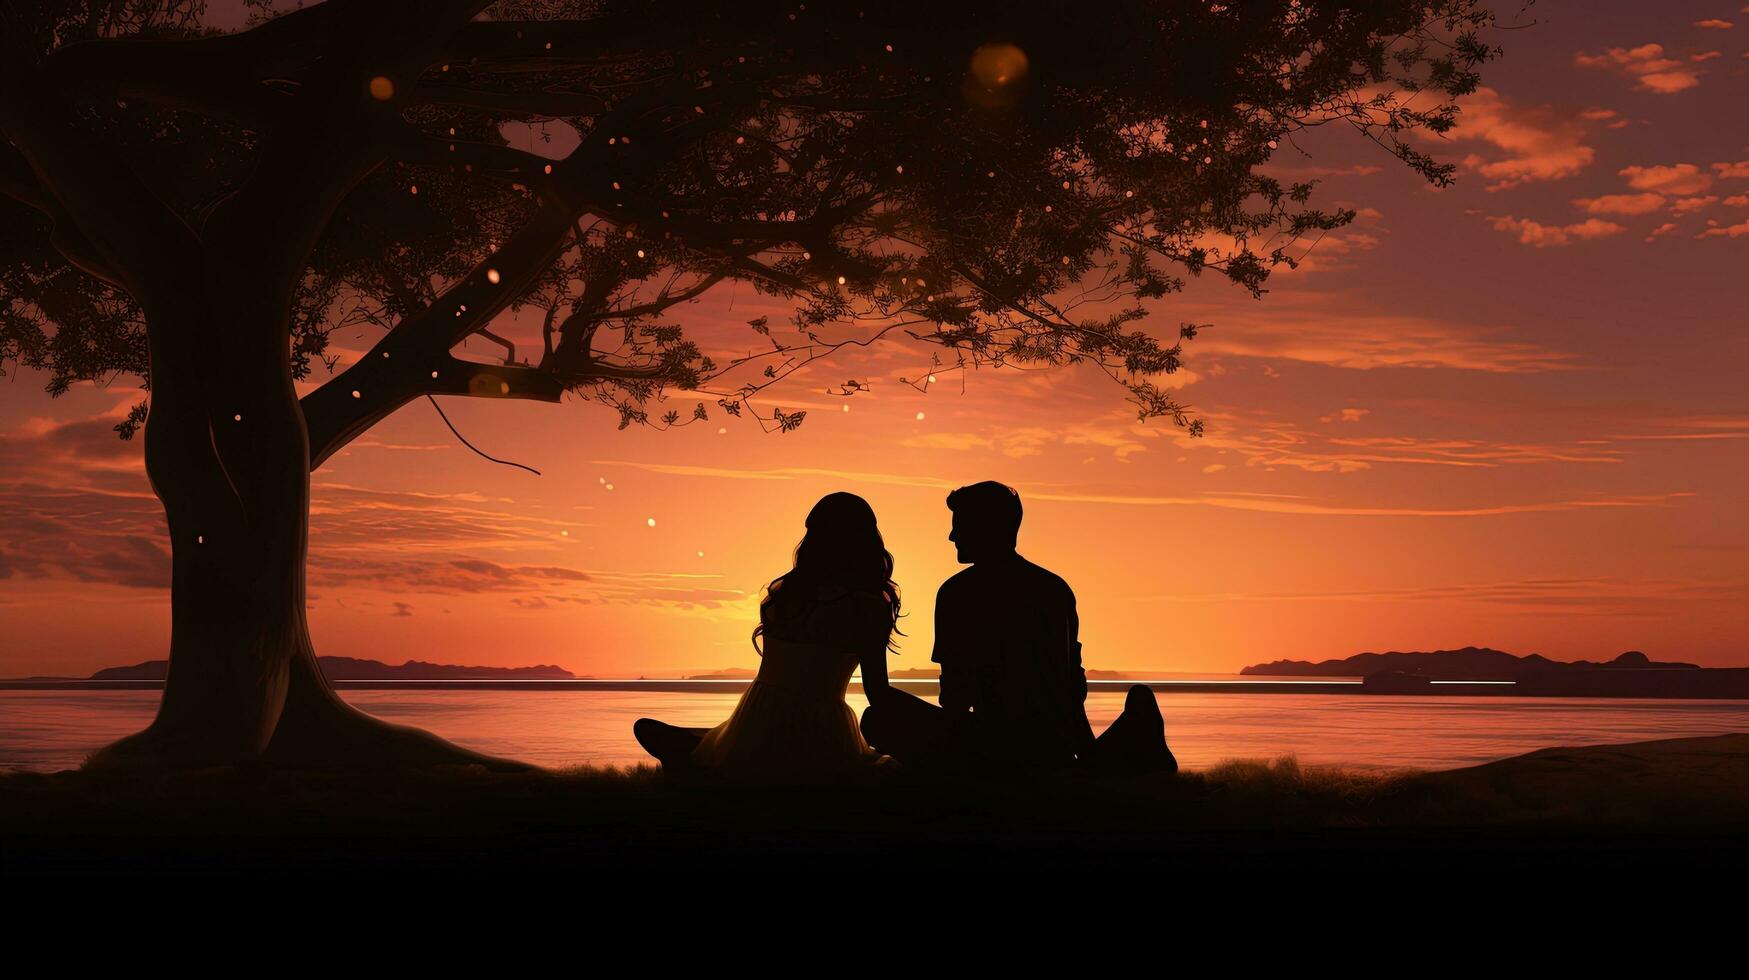 Couple s silhouette picnicking seaside photo